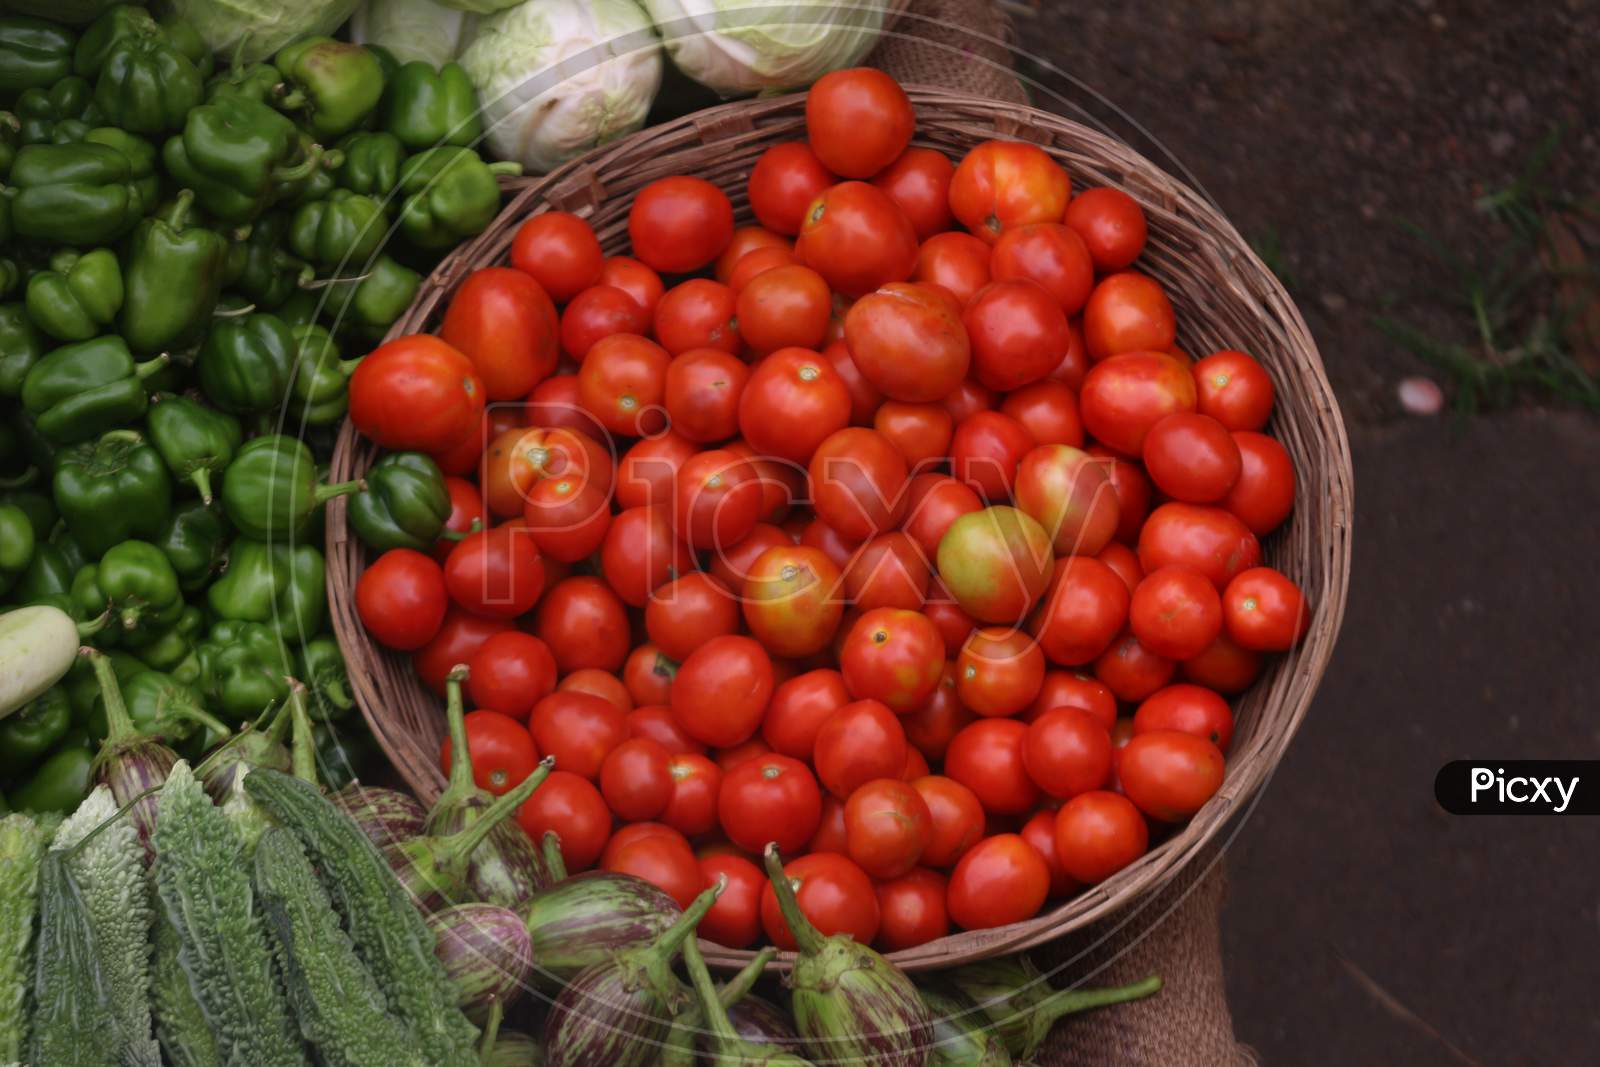 Freshly harvested organic red tomatoes